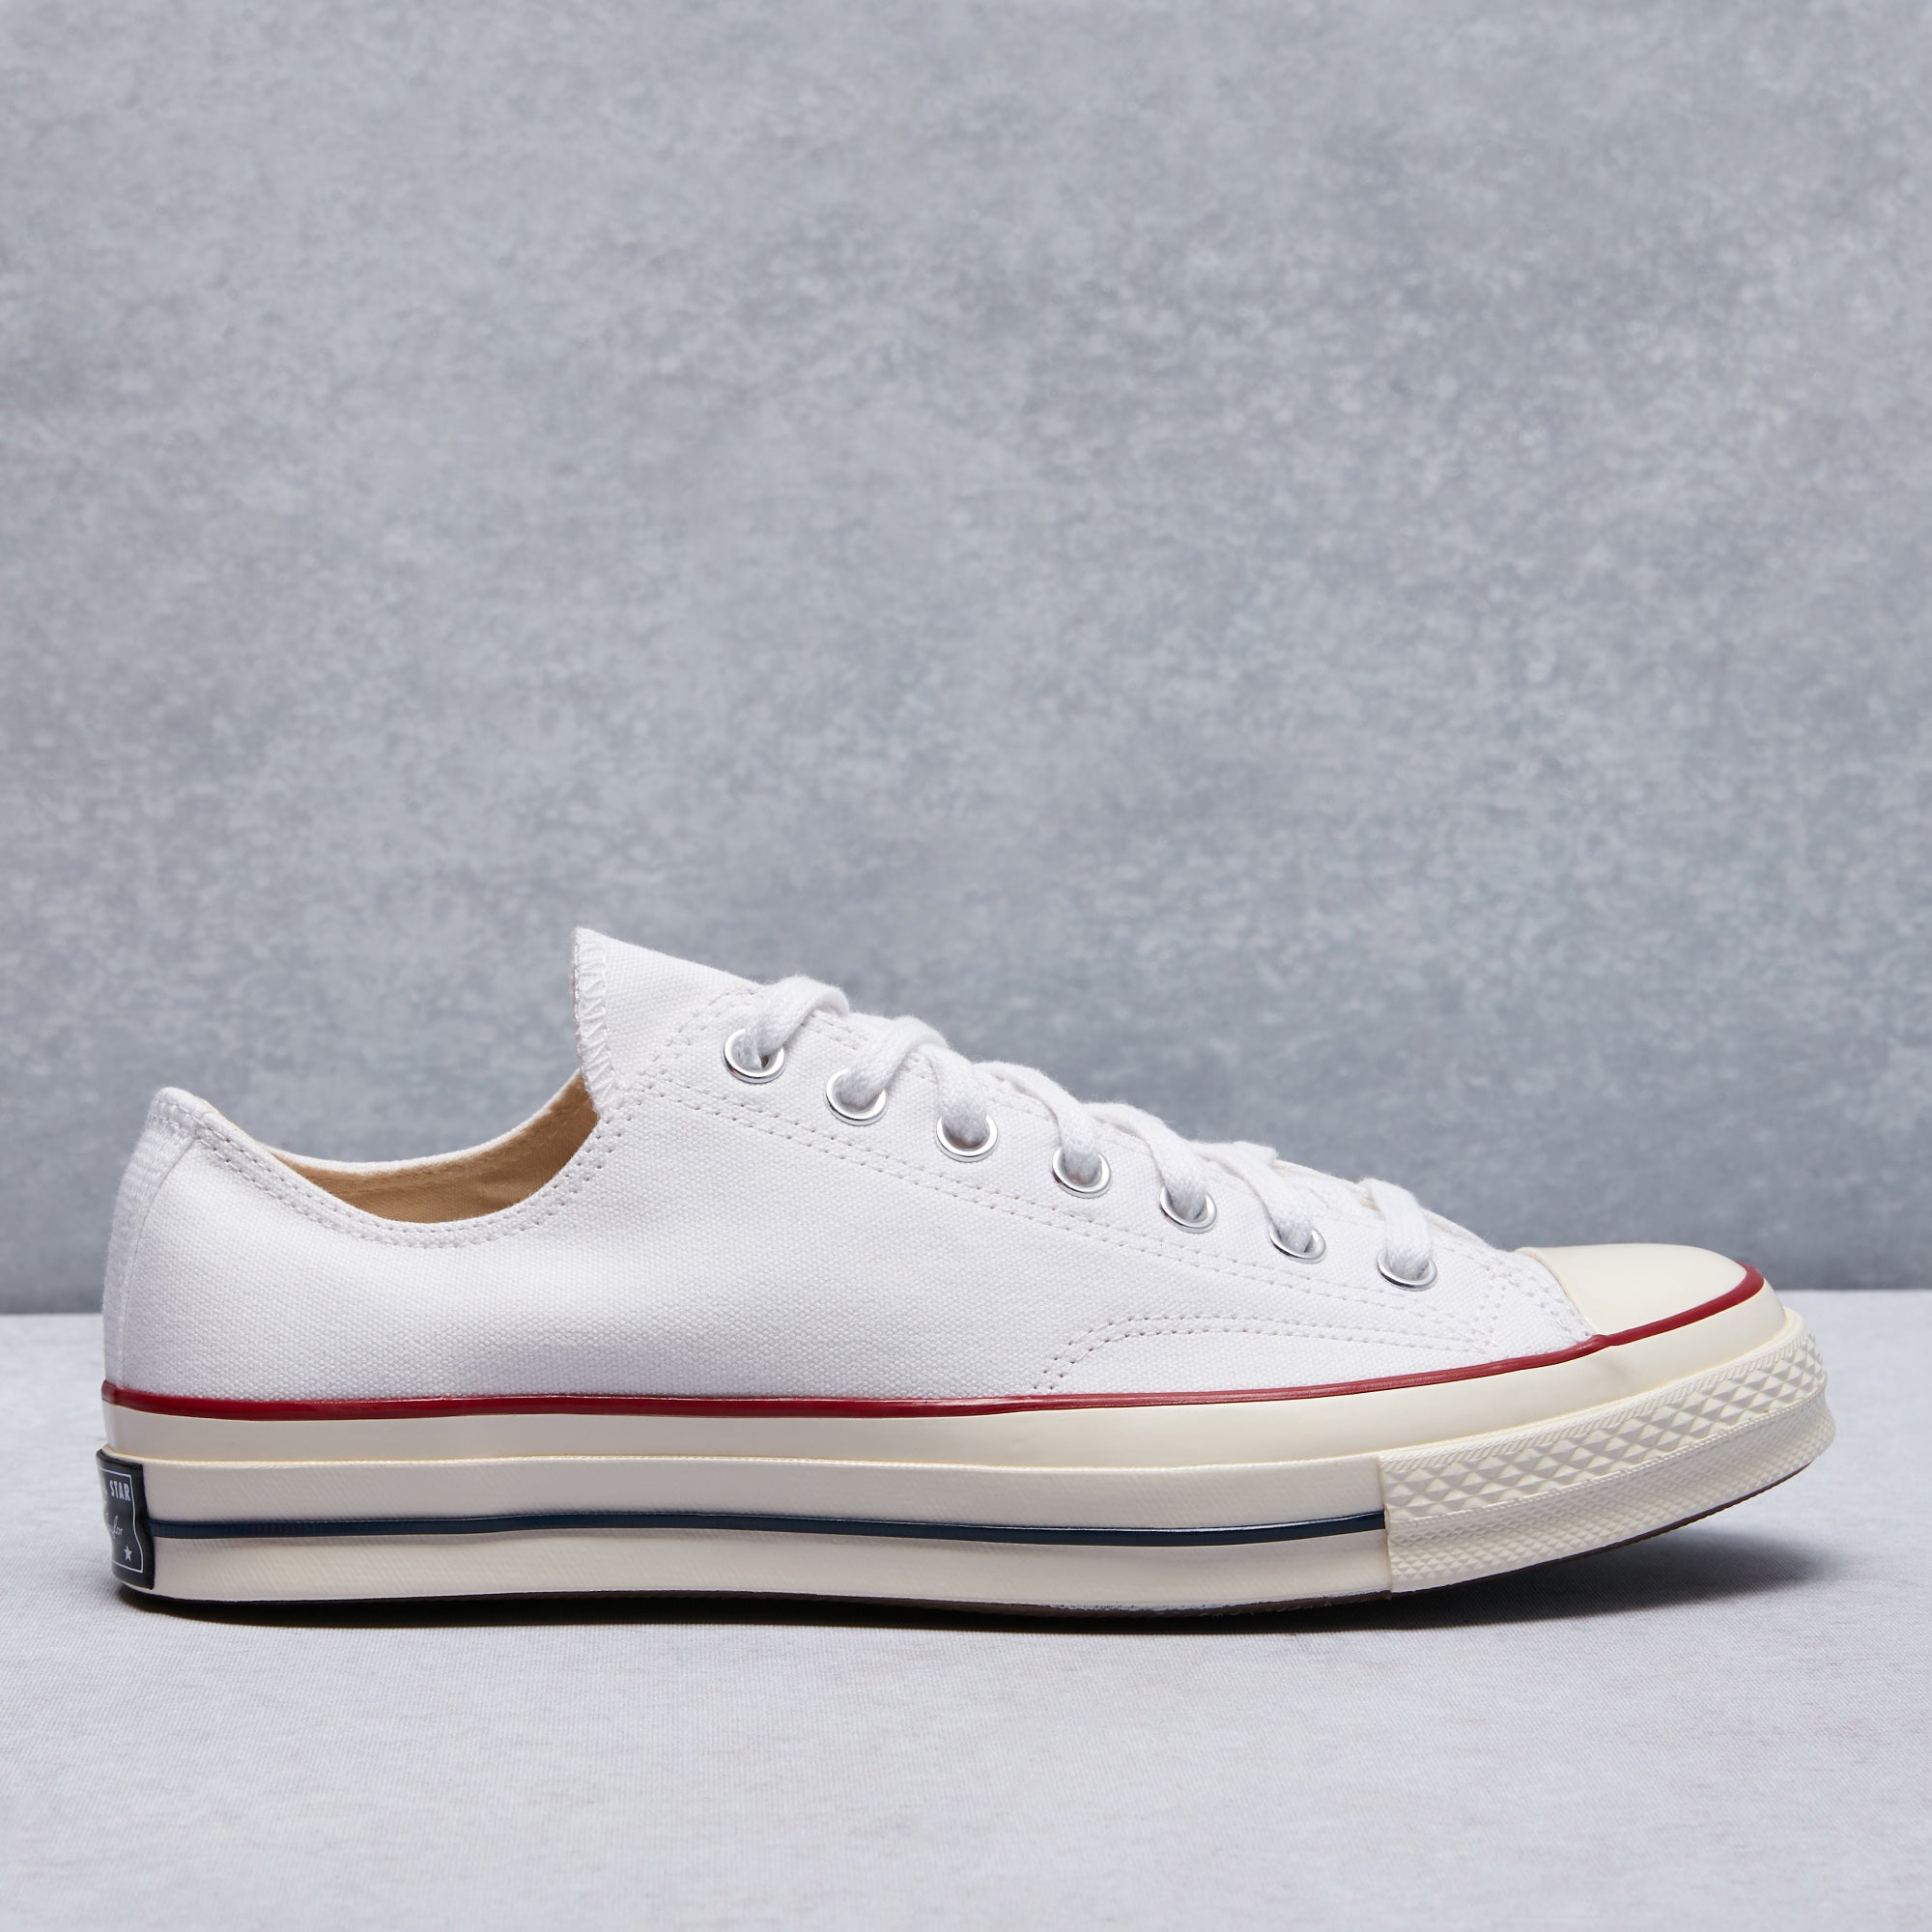 Converse All Star Shoes | Buy Sneakers 